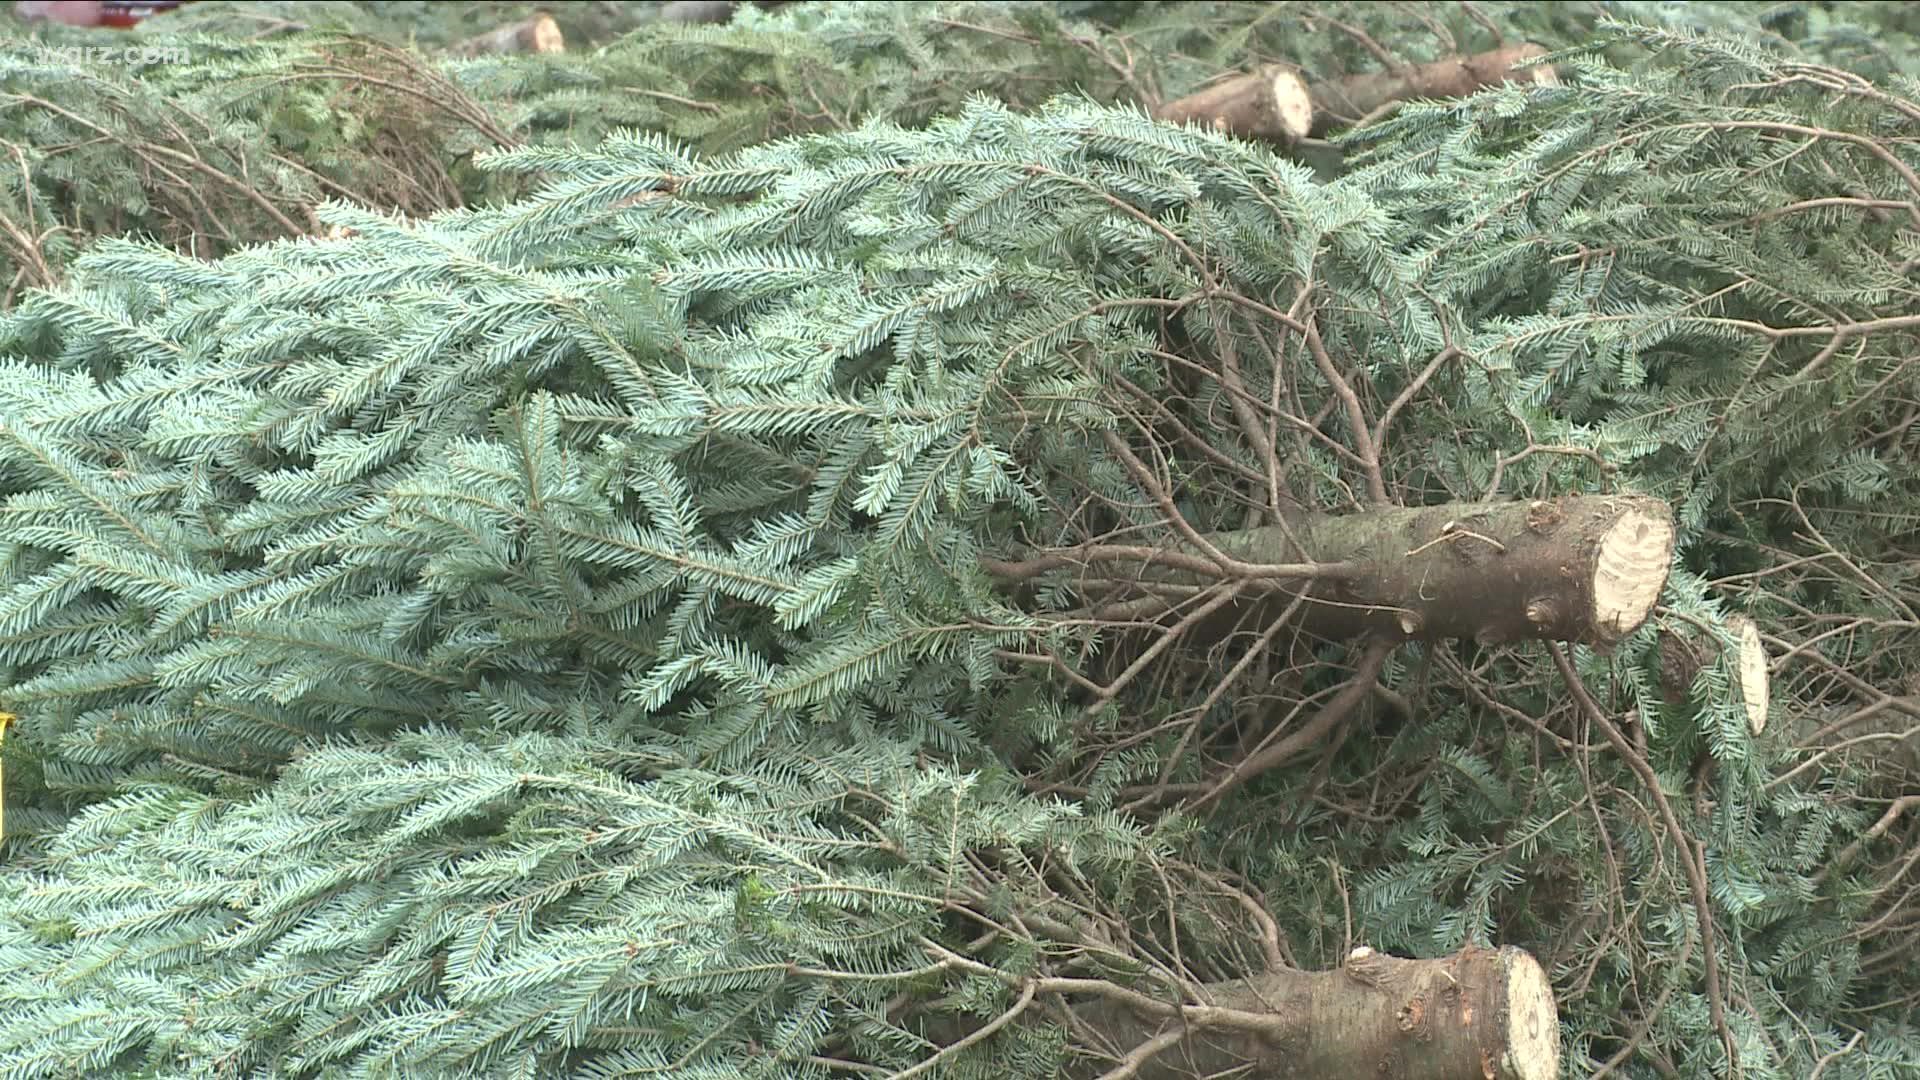 It's that time of year when we might see Christmas trees popping up at Garden Center across Western New York.